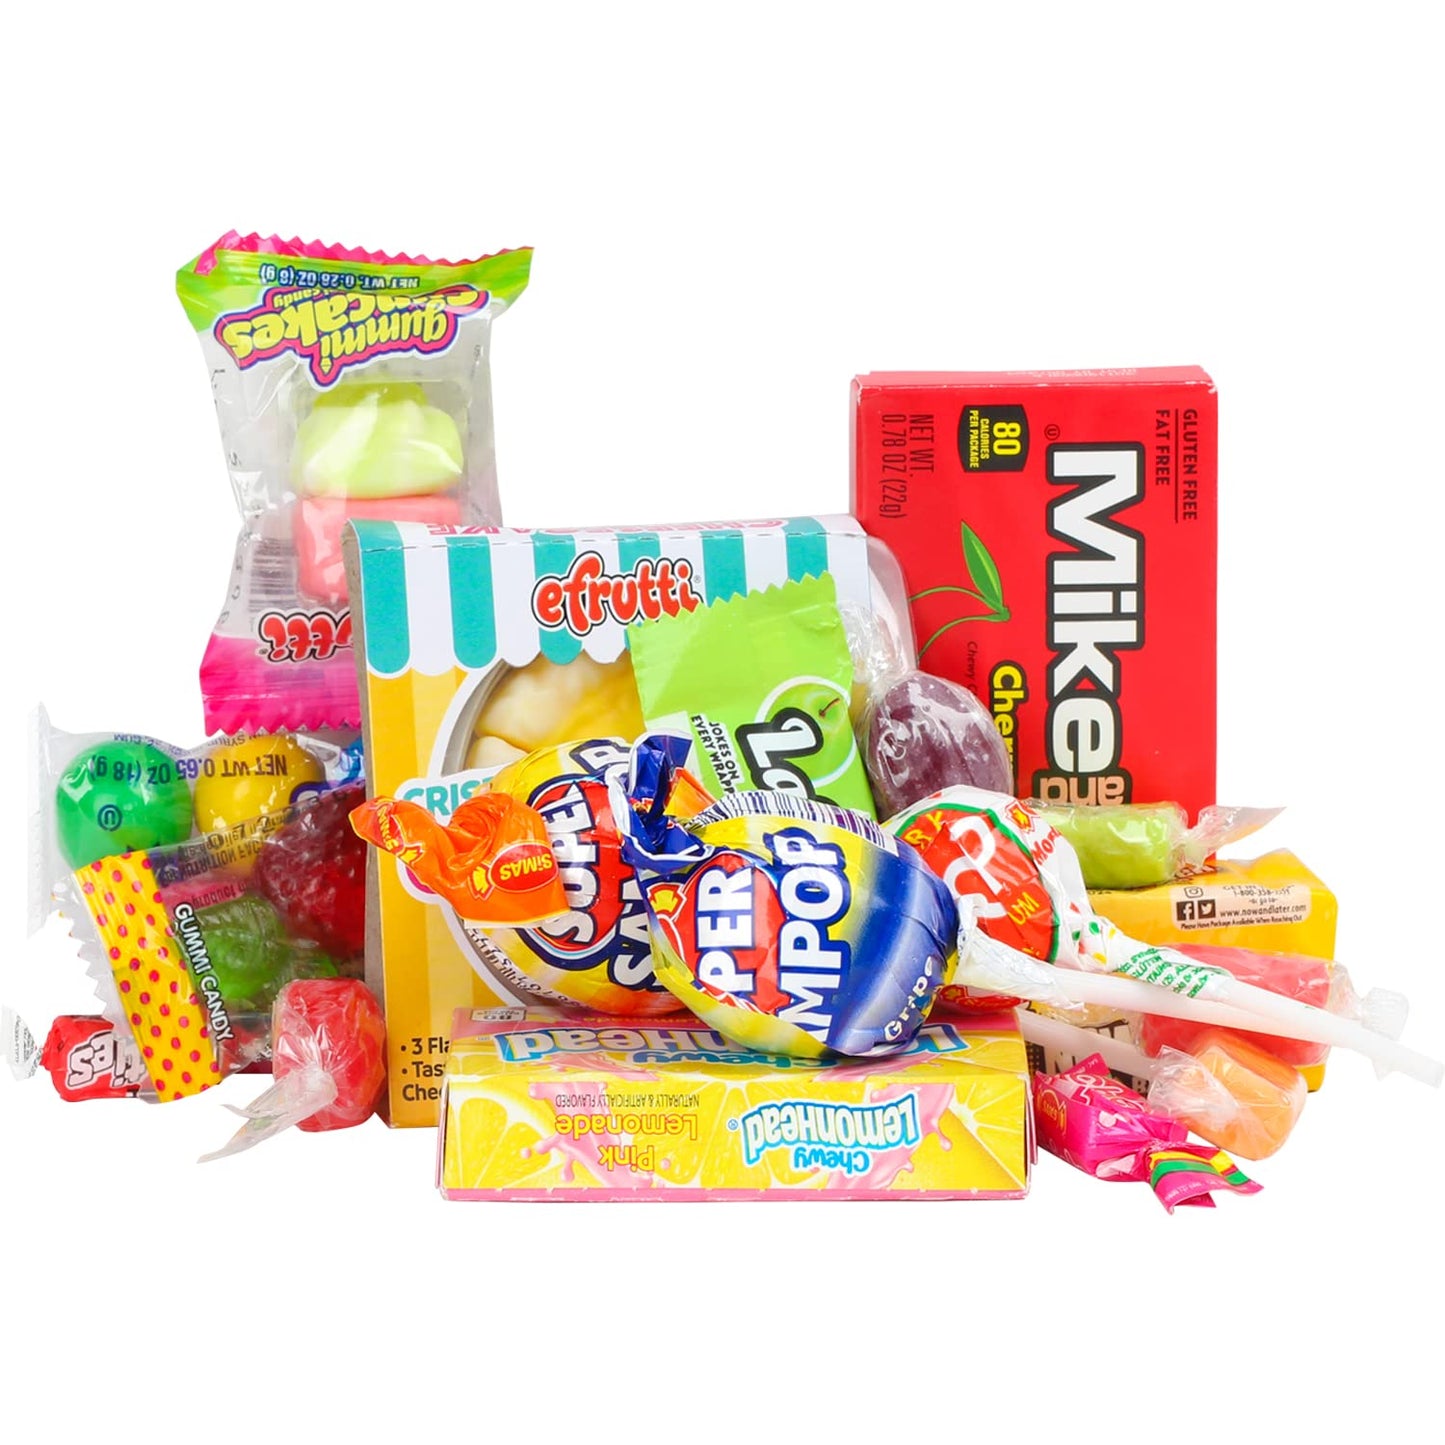 Party Mix - 4 Pound - Piata Candy Filler - Bulk Parade Candies - Individually Wrapped Candies - Assorted Party Candy - Assorted Candy Variety Pack - Bulk Candy for Kids